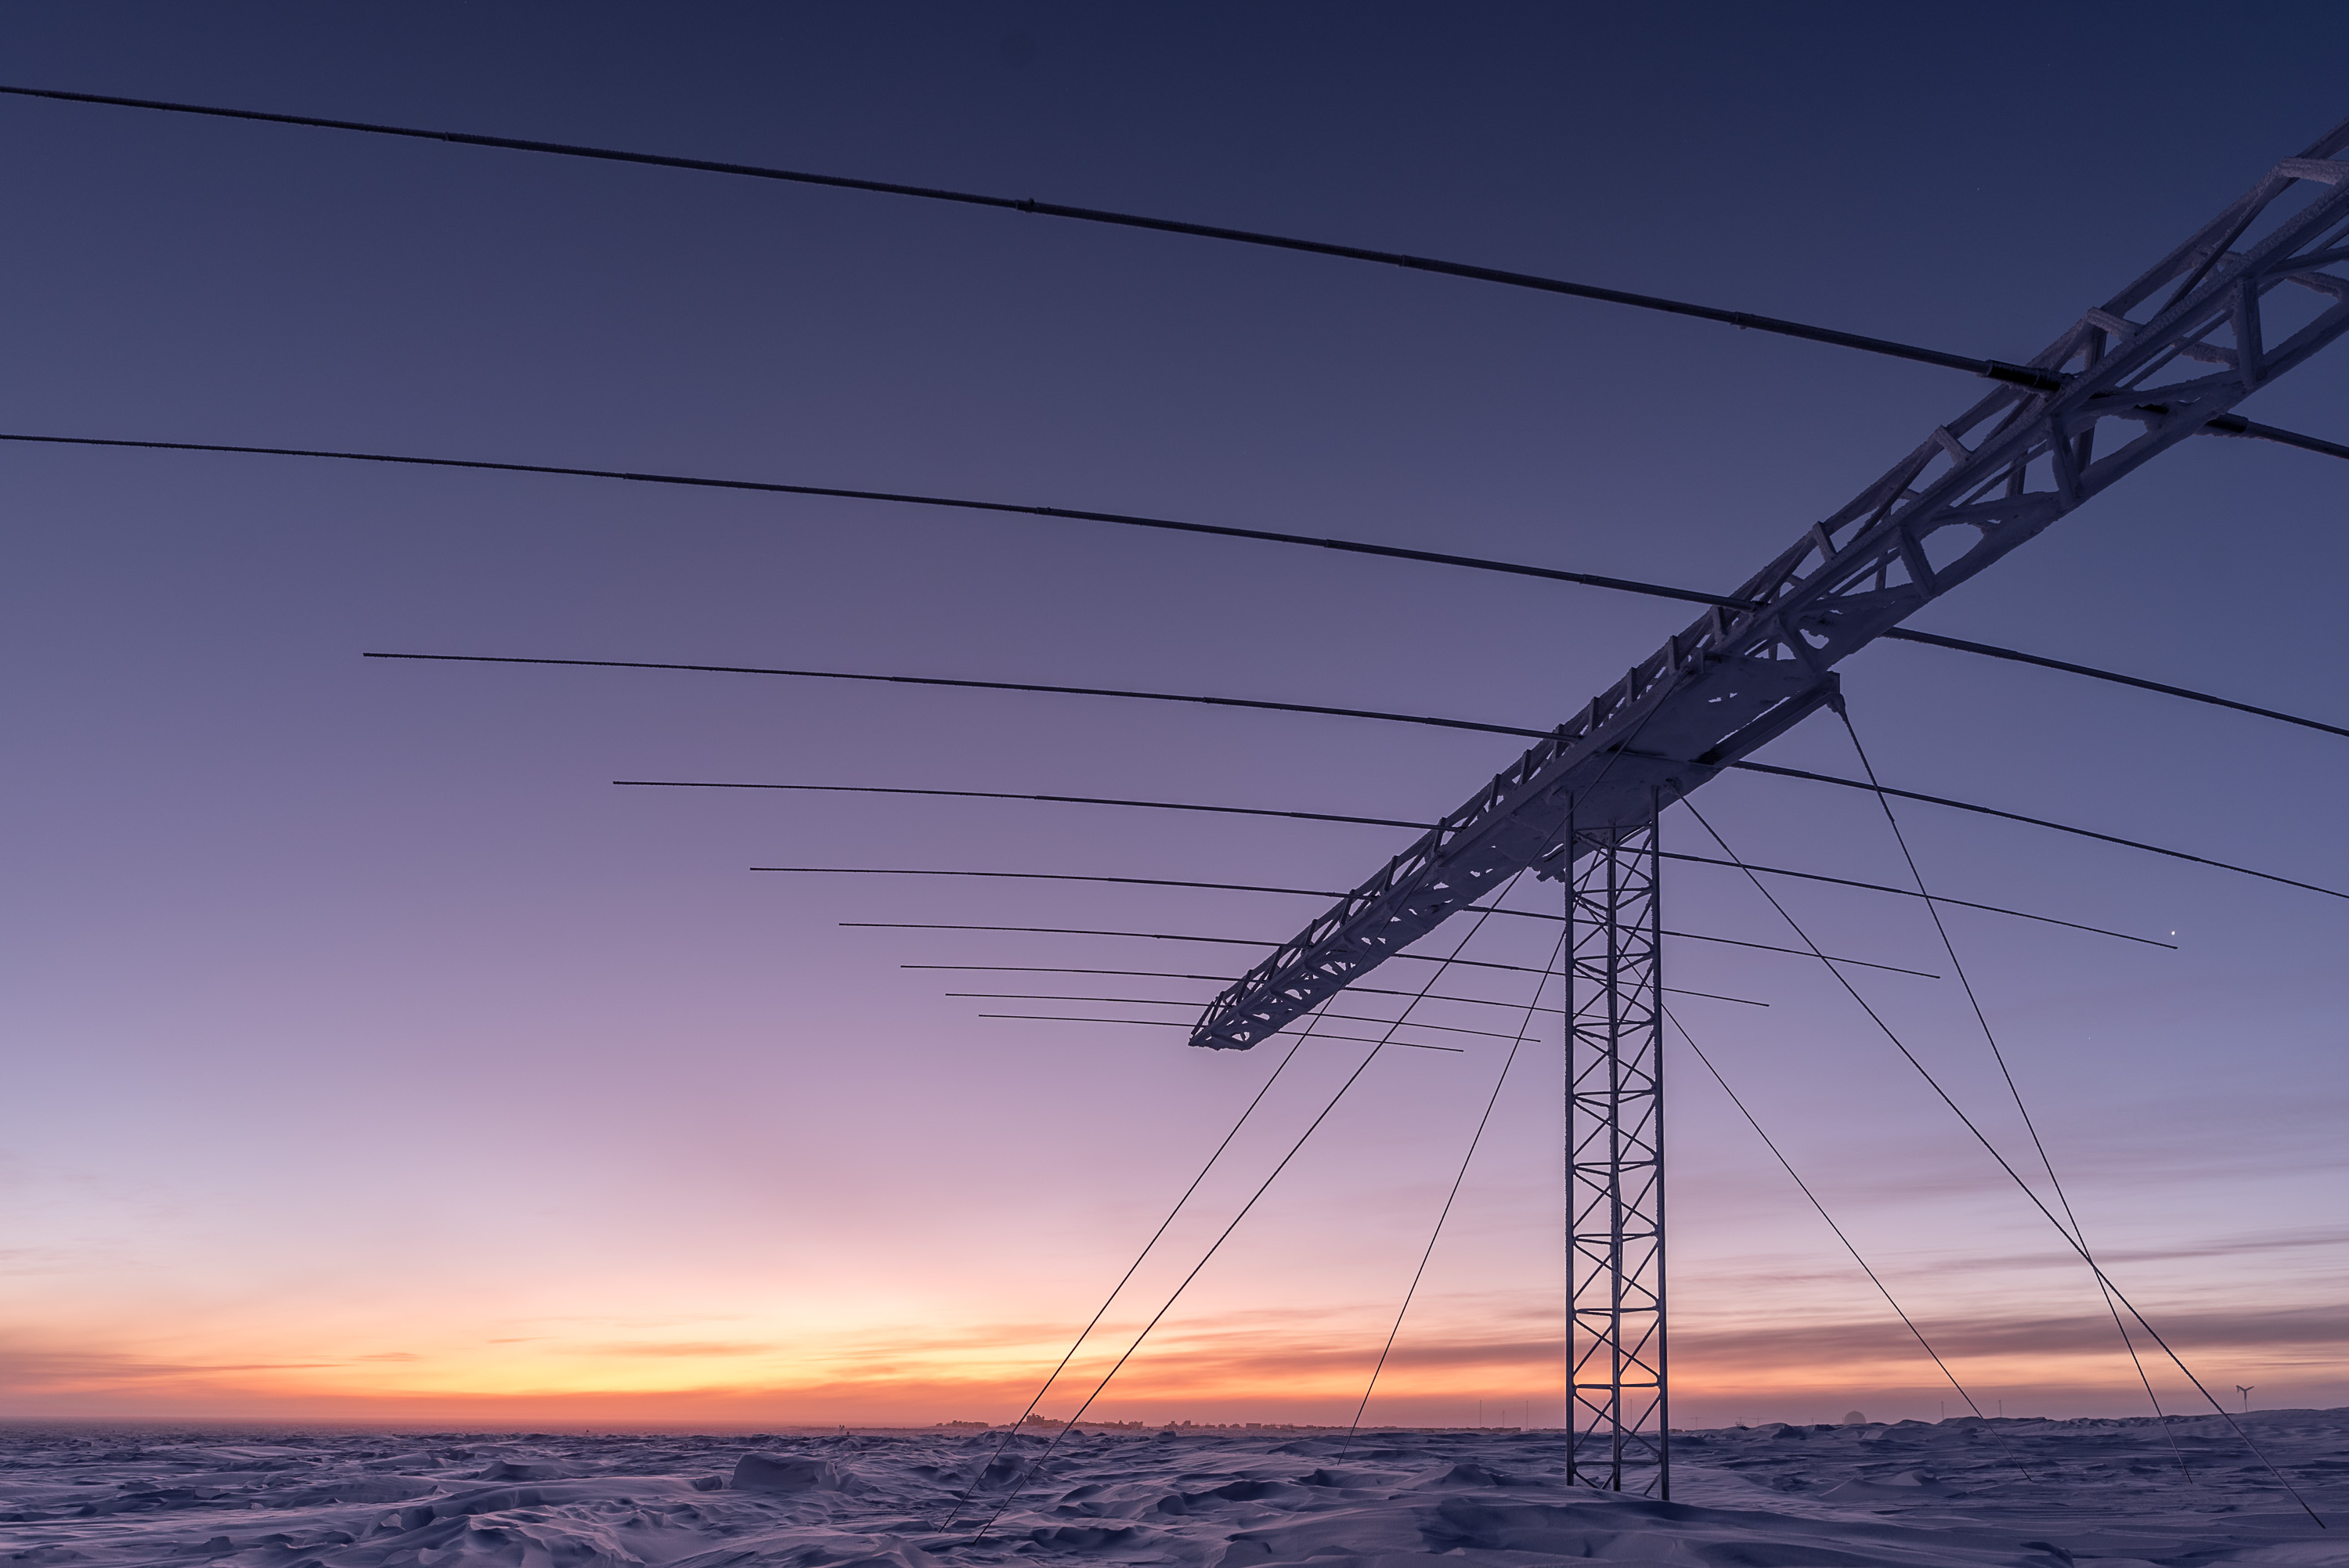 A view of an antenna at sunrise.